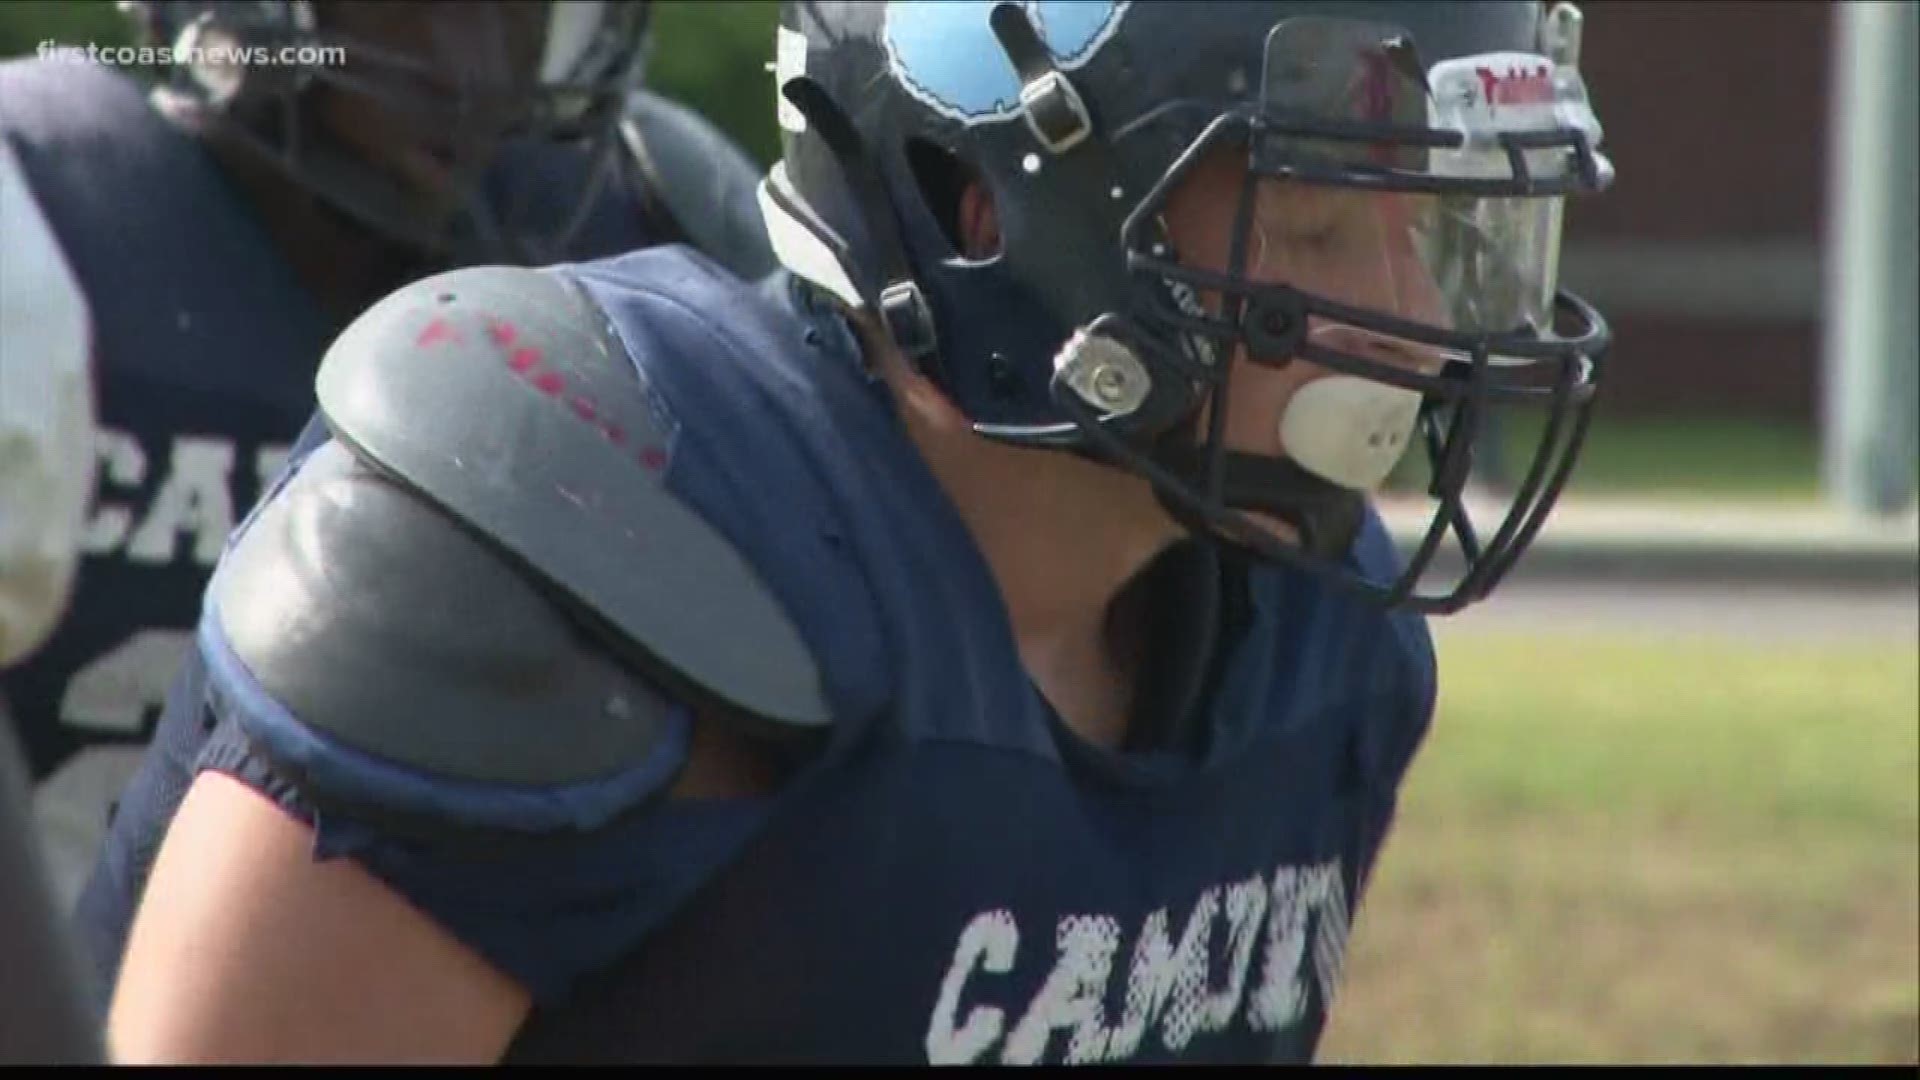 This week's Athlete of the Week (October 8) is senior Hunter Guarino, the heart of an undefeated Camden County football team.